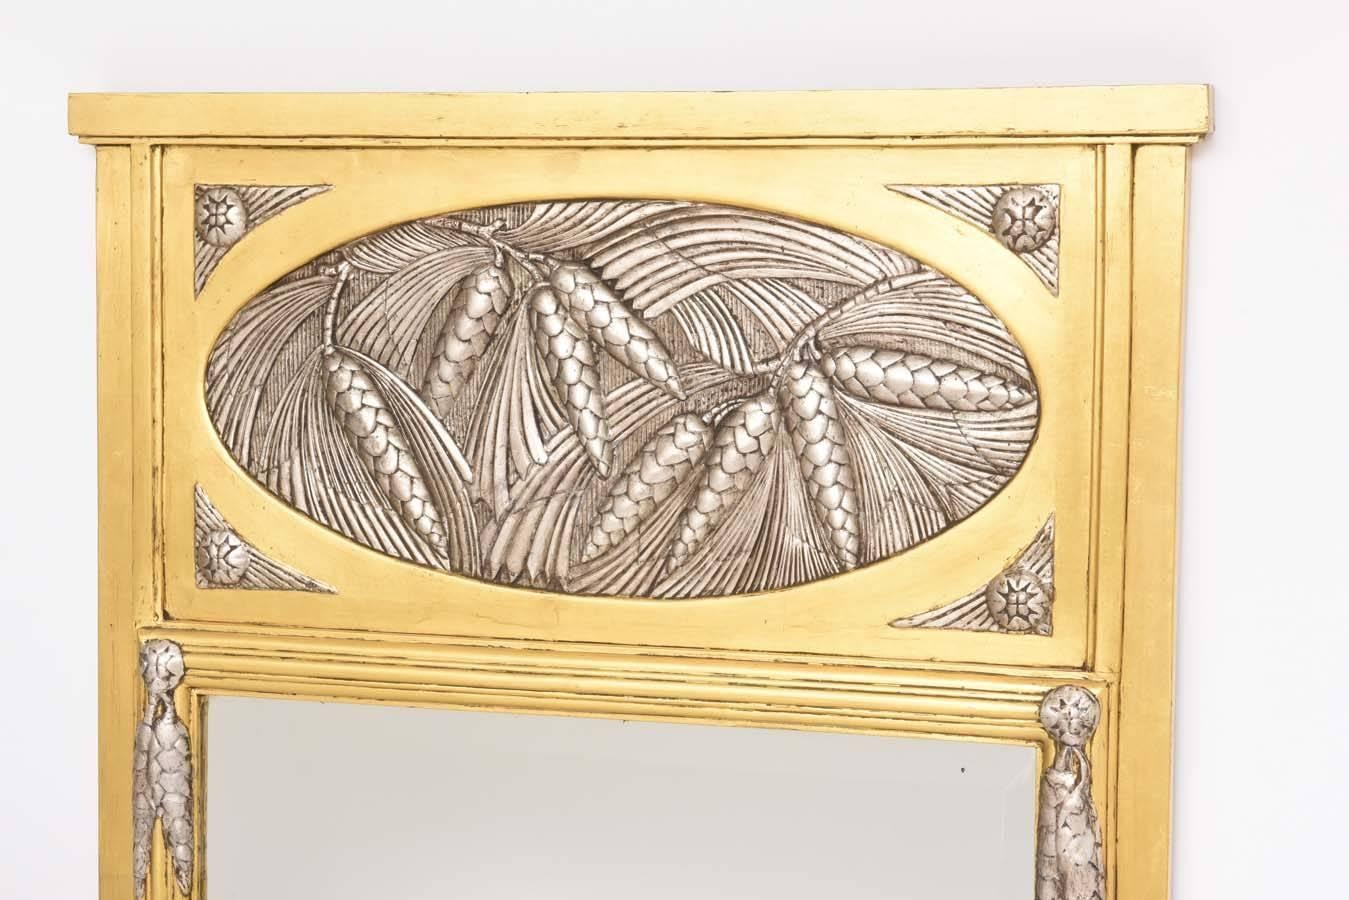 This stylish Art Deco trumeau mirror dates from the 1930s and was purchased in France. The piece is simple and elegant with its pine cones and needles in a soft silver leaf medallion and accents. The gold and silver leaf has mellowed to a soft